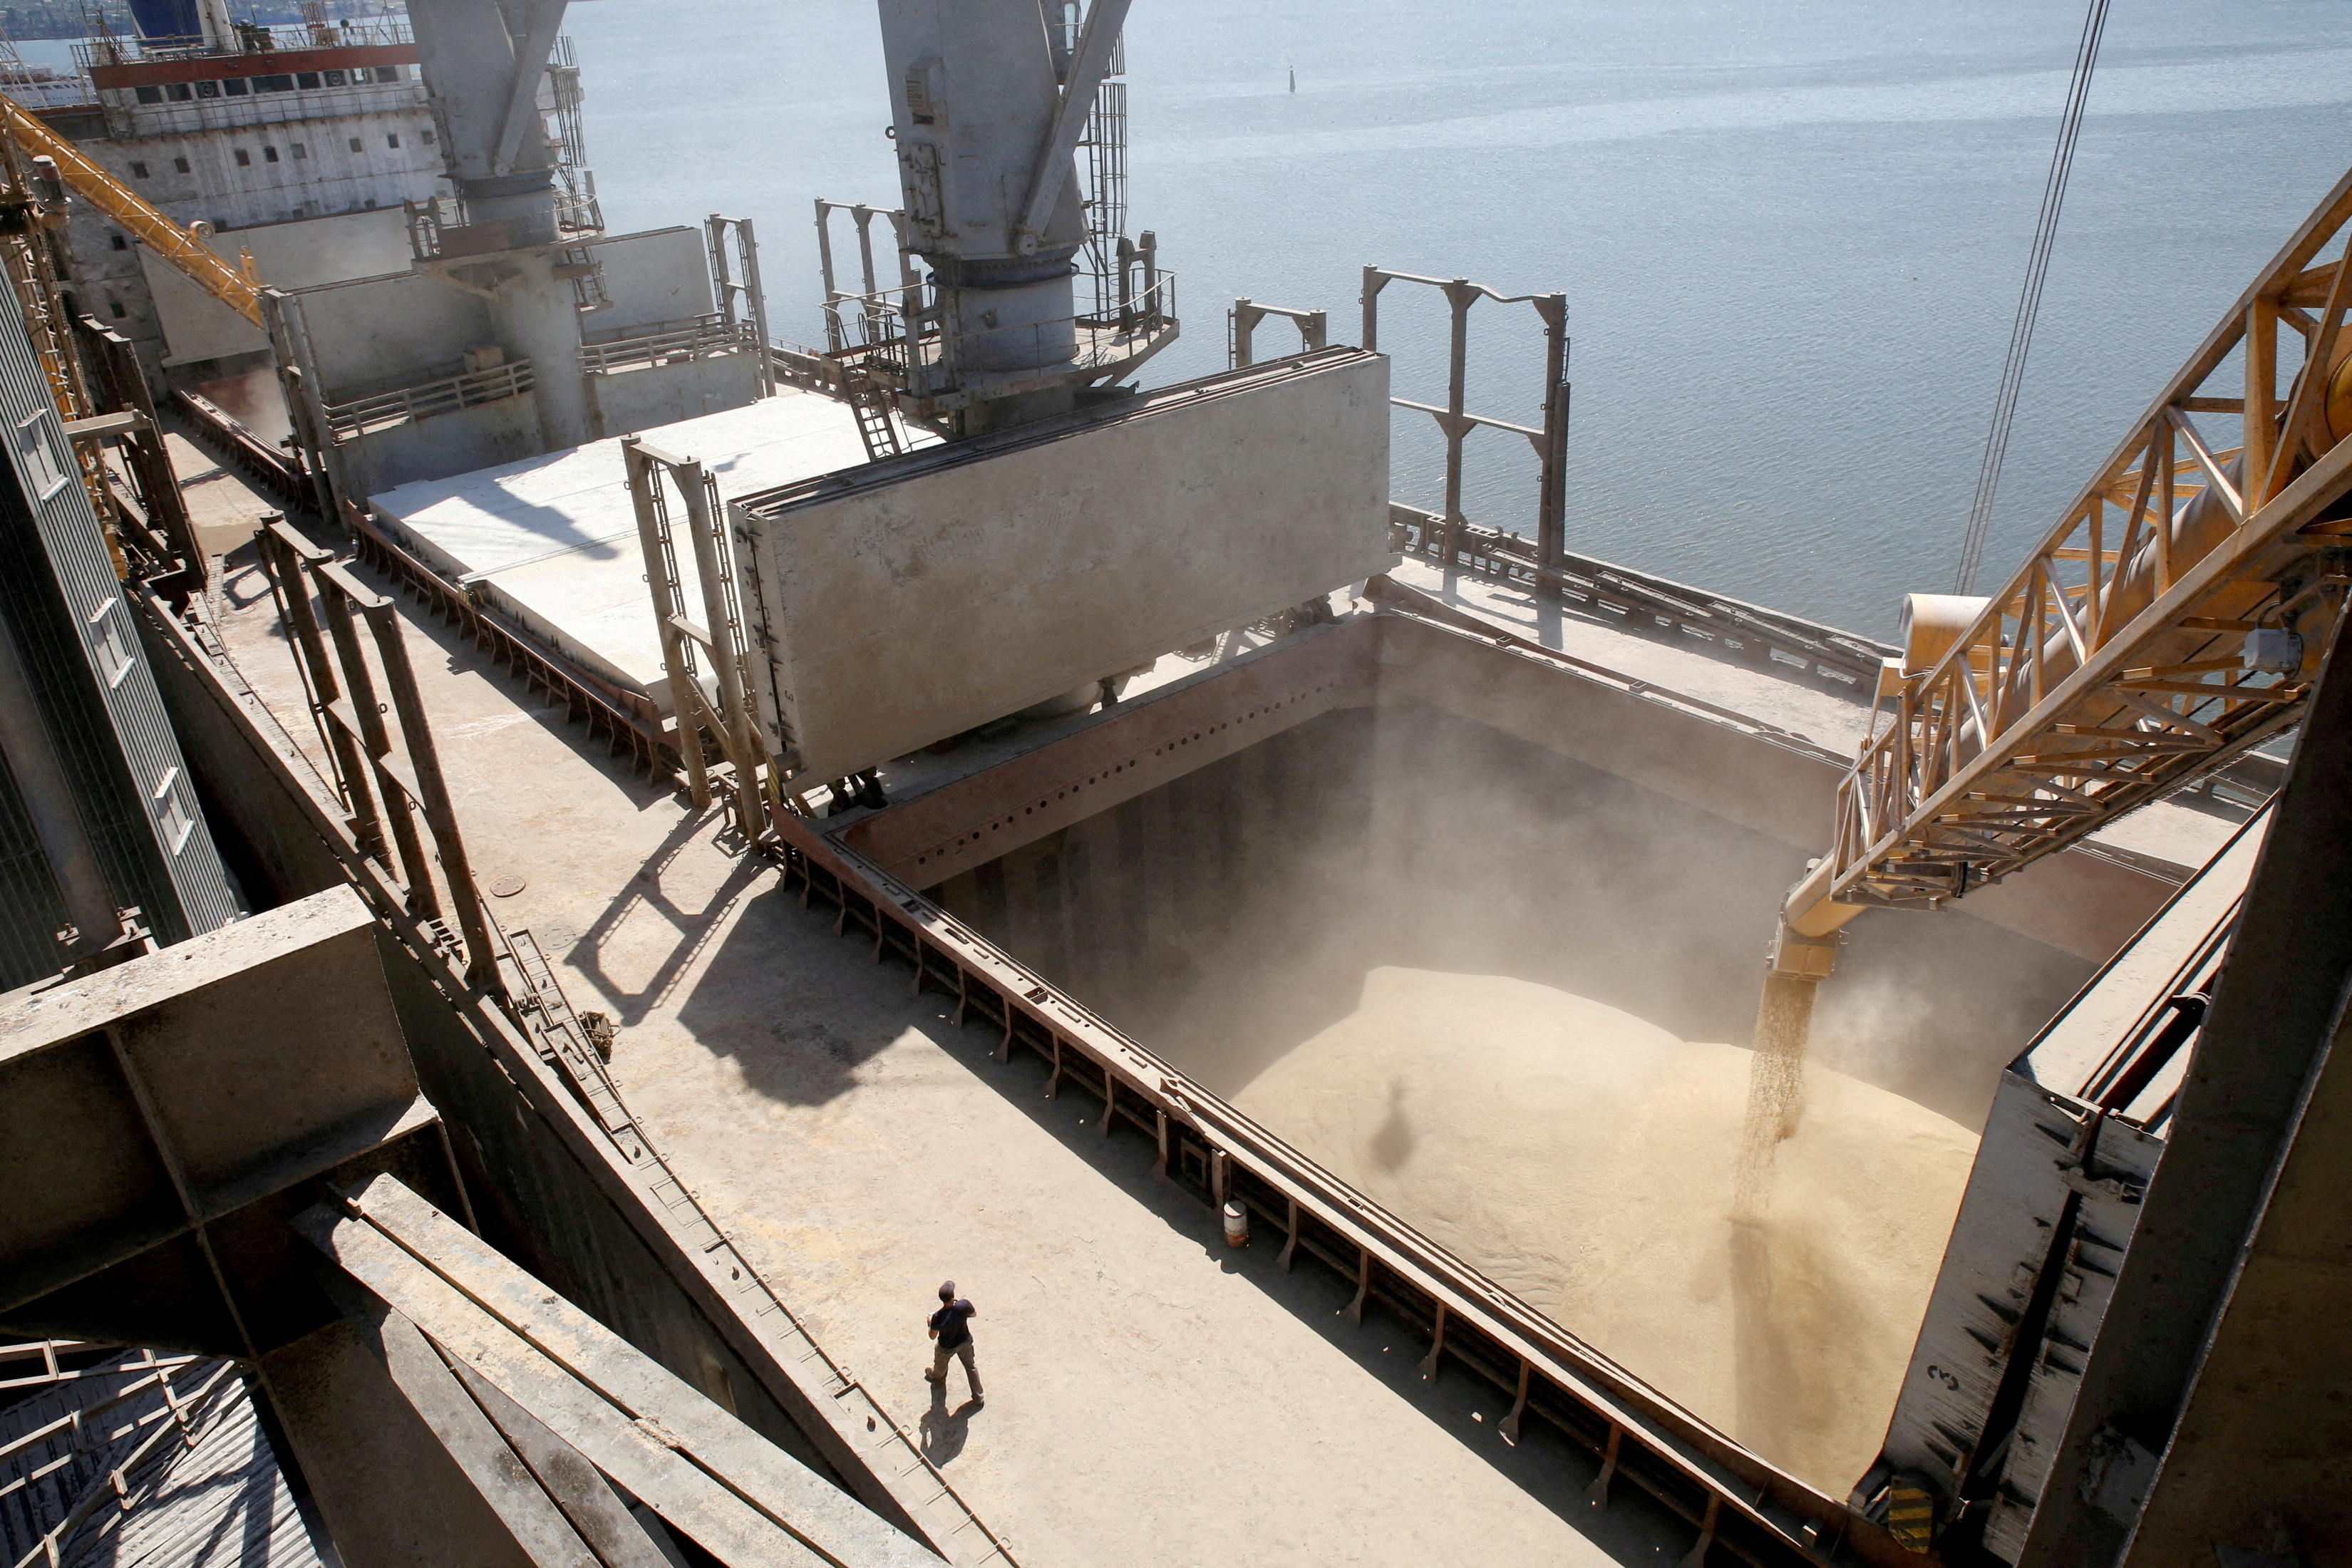 A dockyard worker watches as barley grain is poured into a ship in Nikolaev